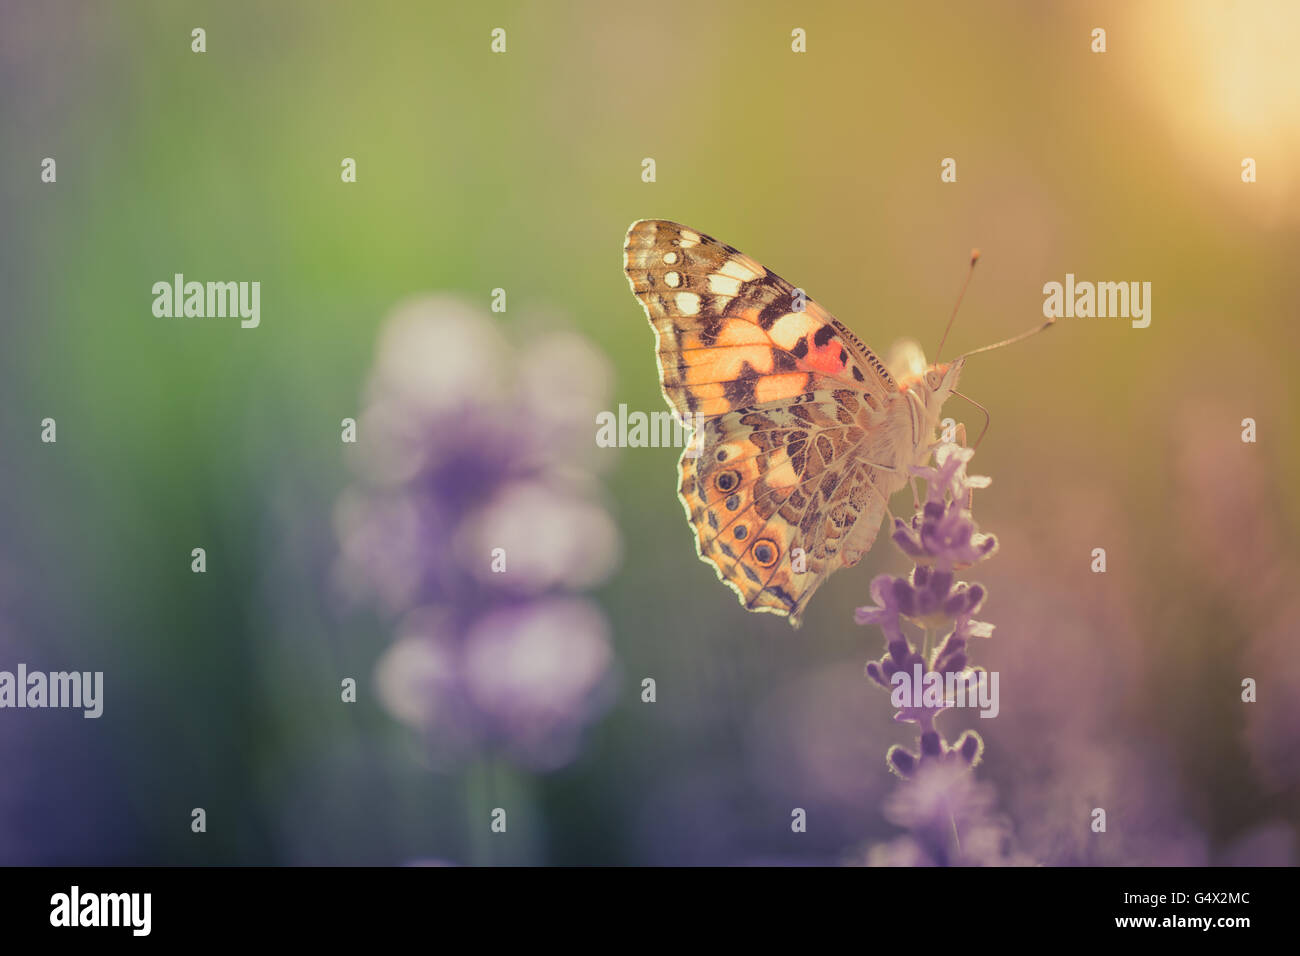 Beautiful inspirational natural background. Butterfly on lavender at sunset. Stock Photo